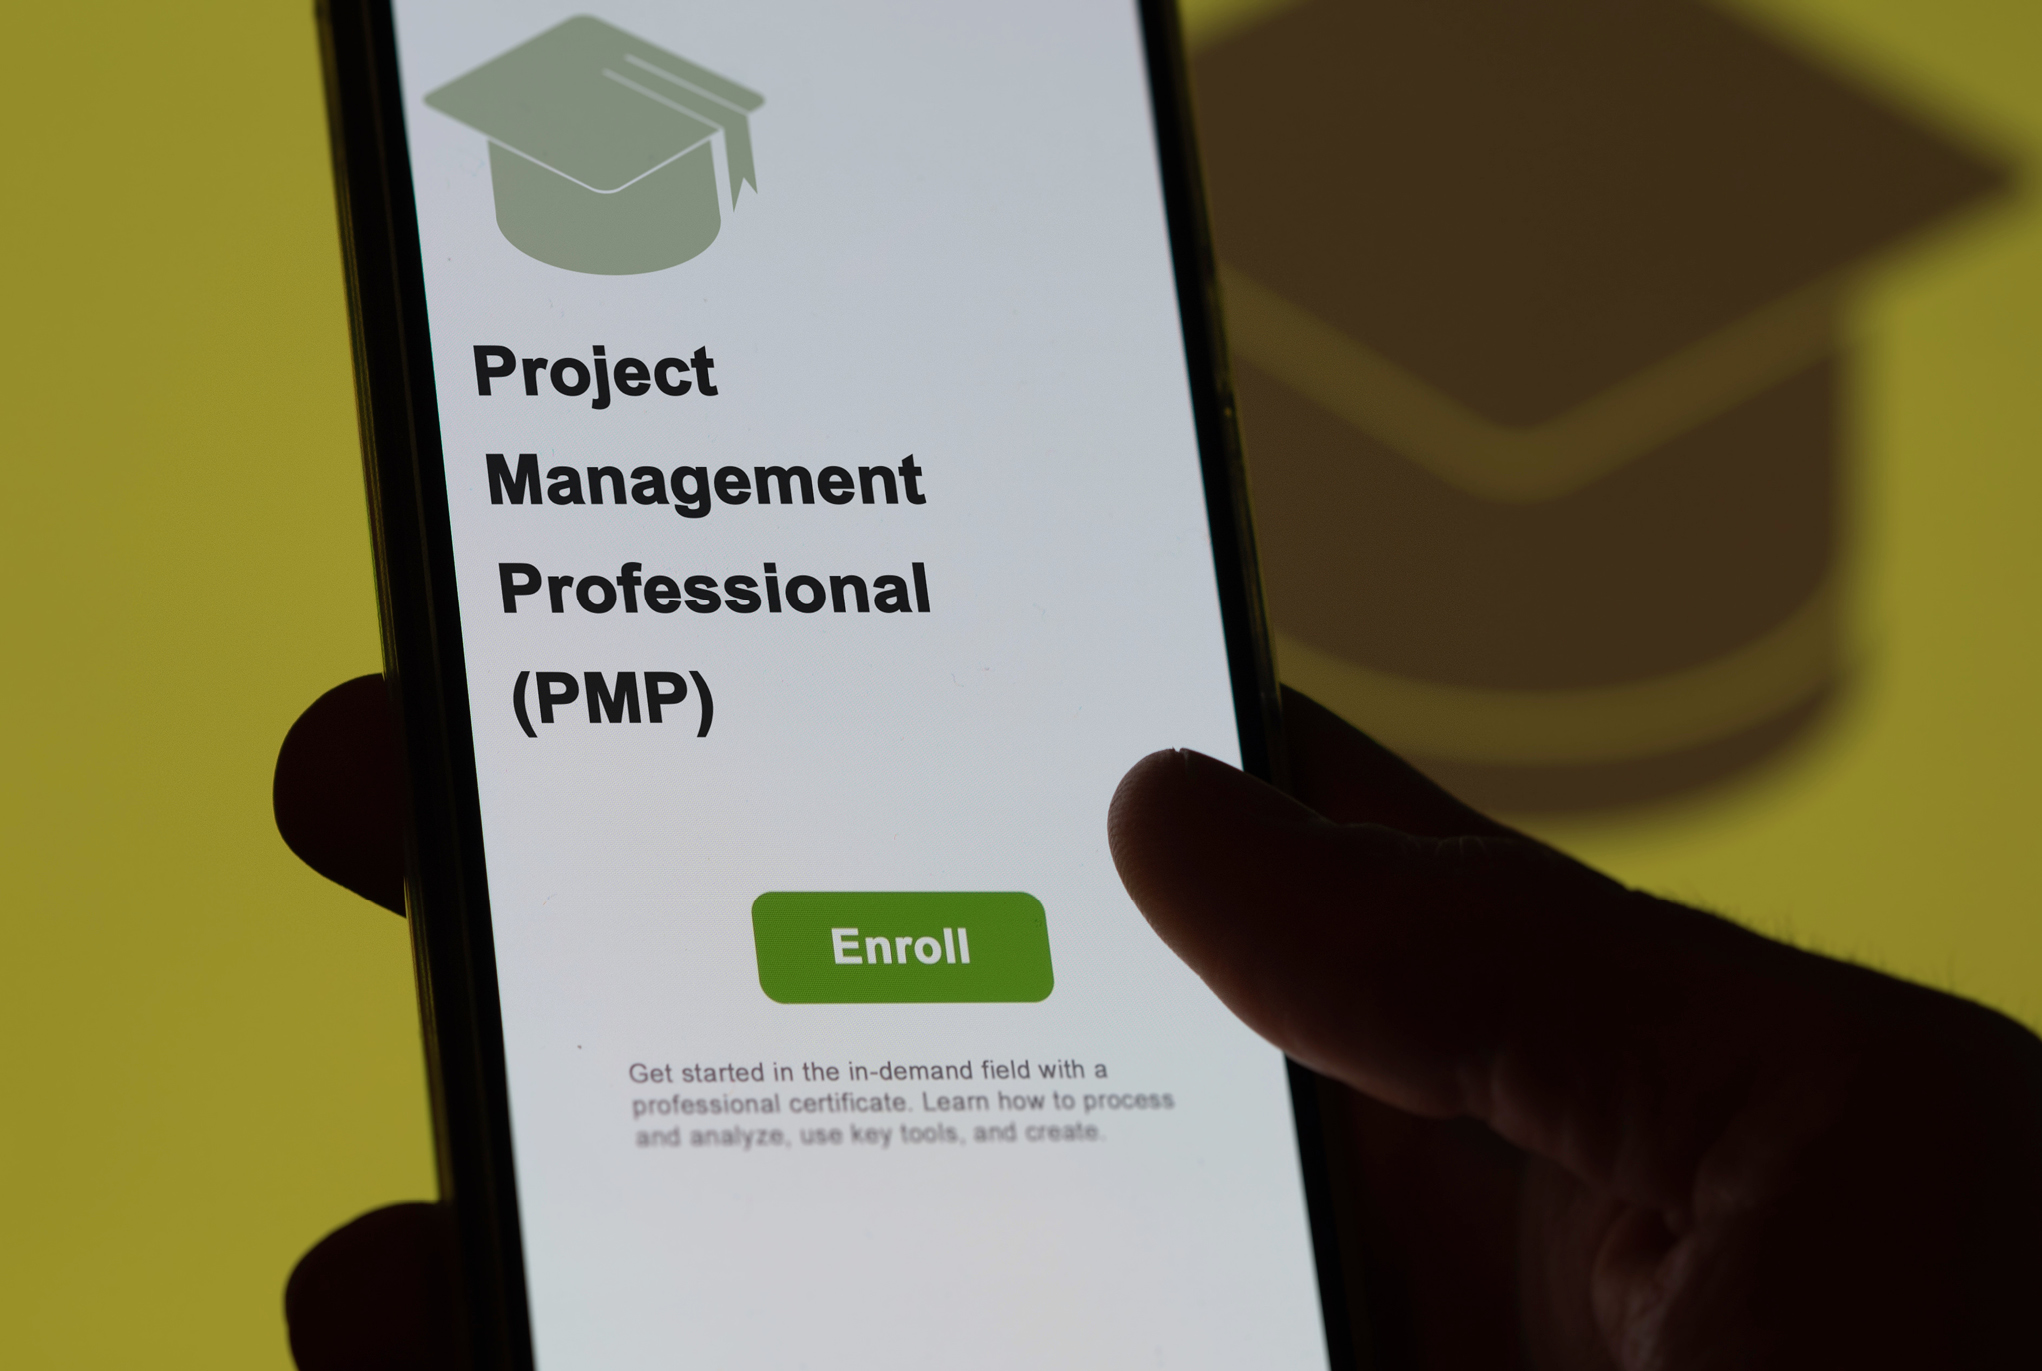 A phone screen displaying the Project Management Professional (PMP) course sign-up page